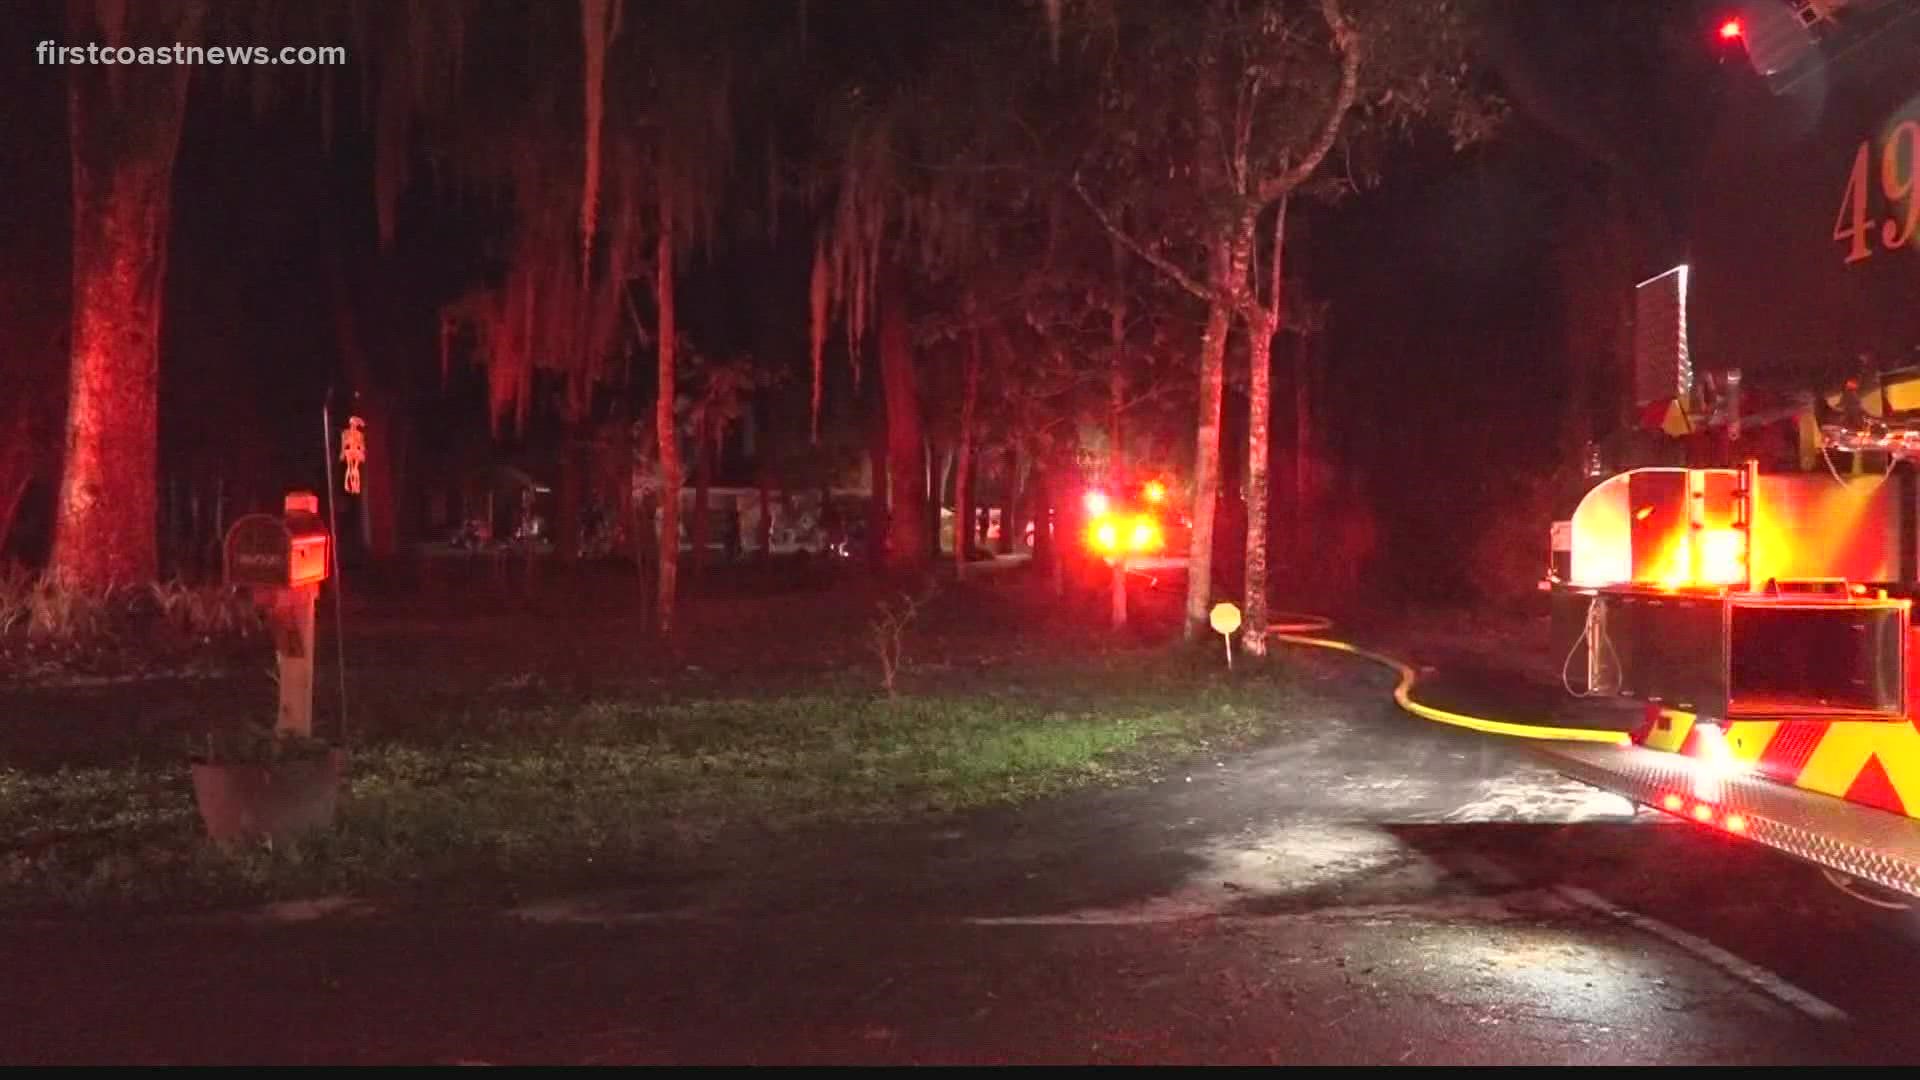 The Jacksonville Fire Rescue Department says there were two adults and one child living in the home. JFRD is now looking into the cause.